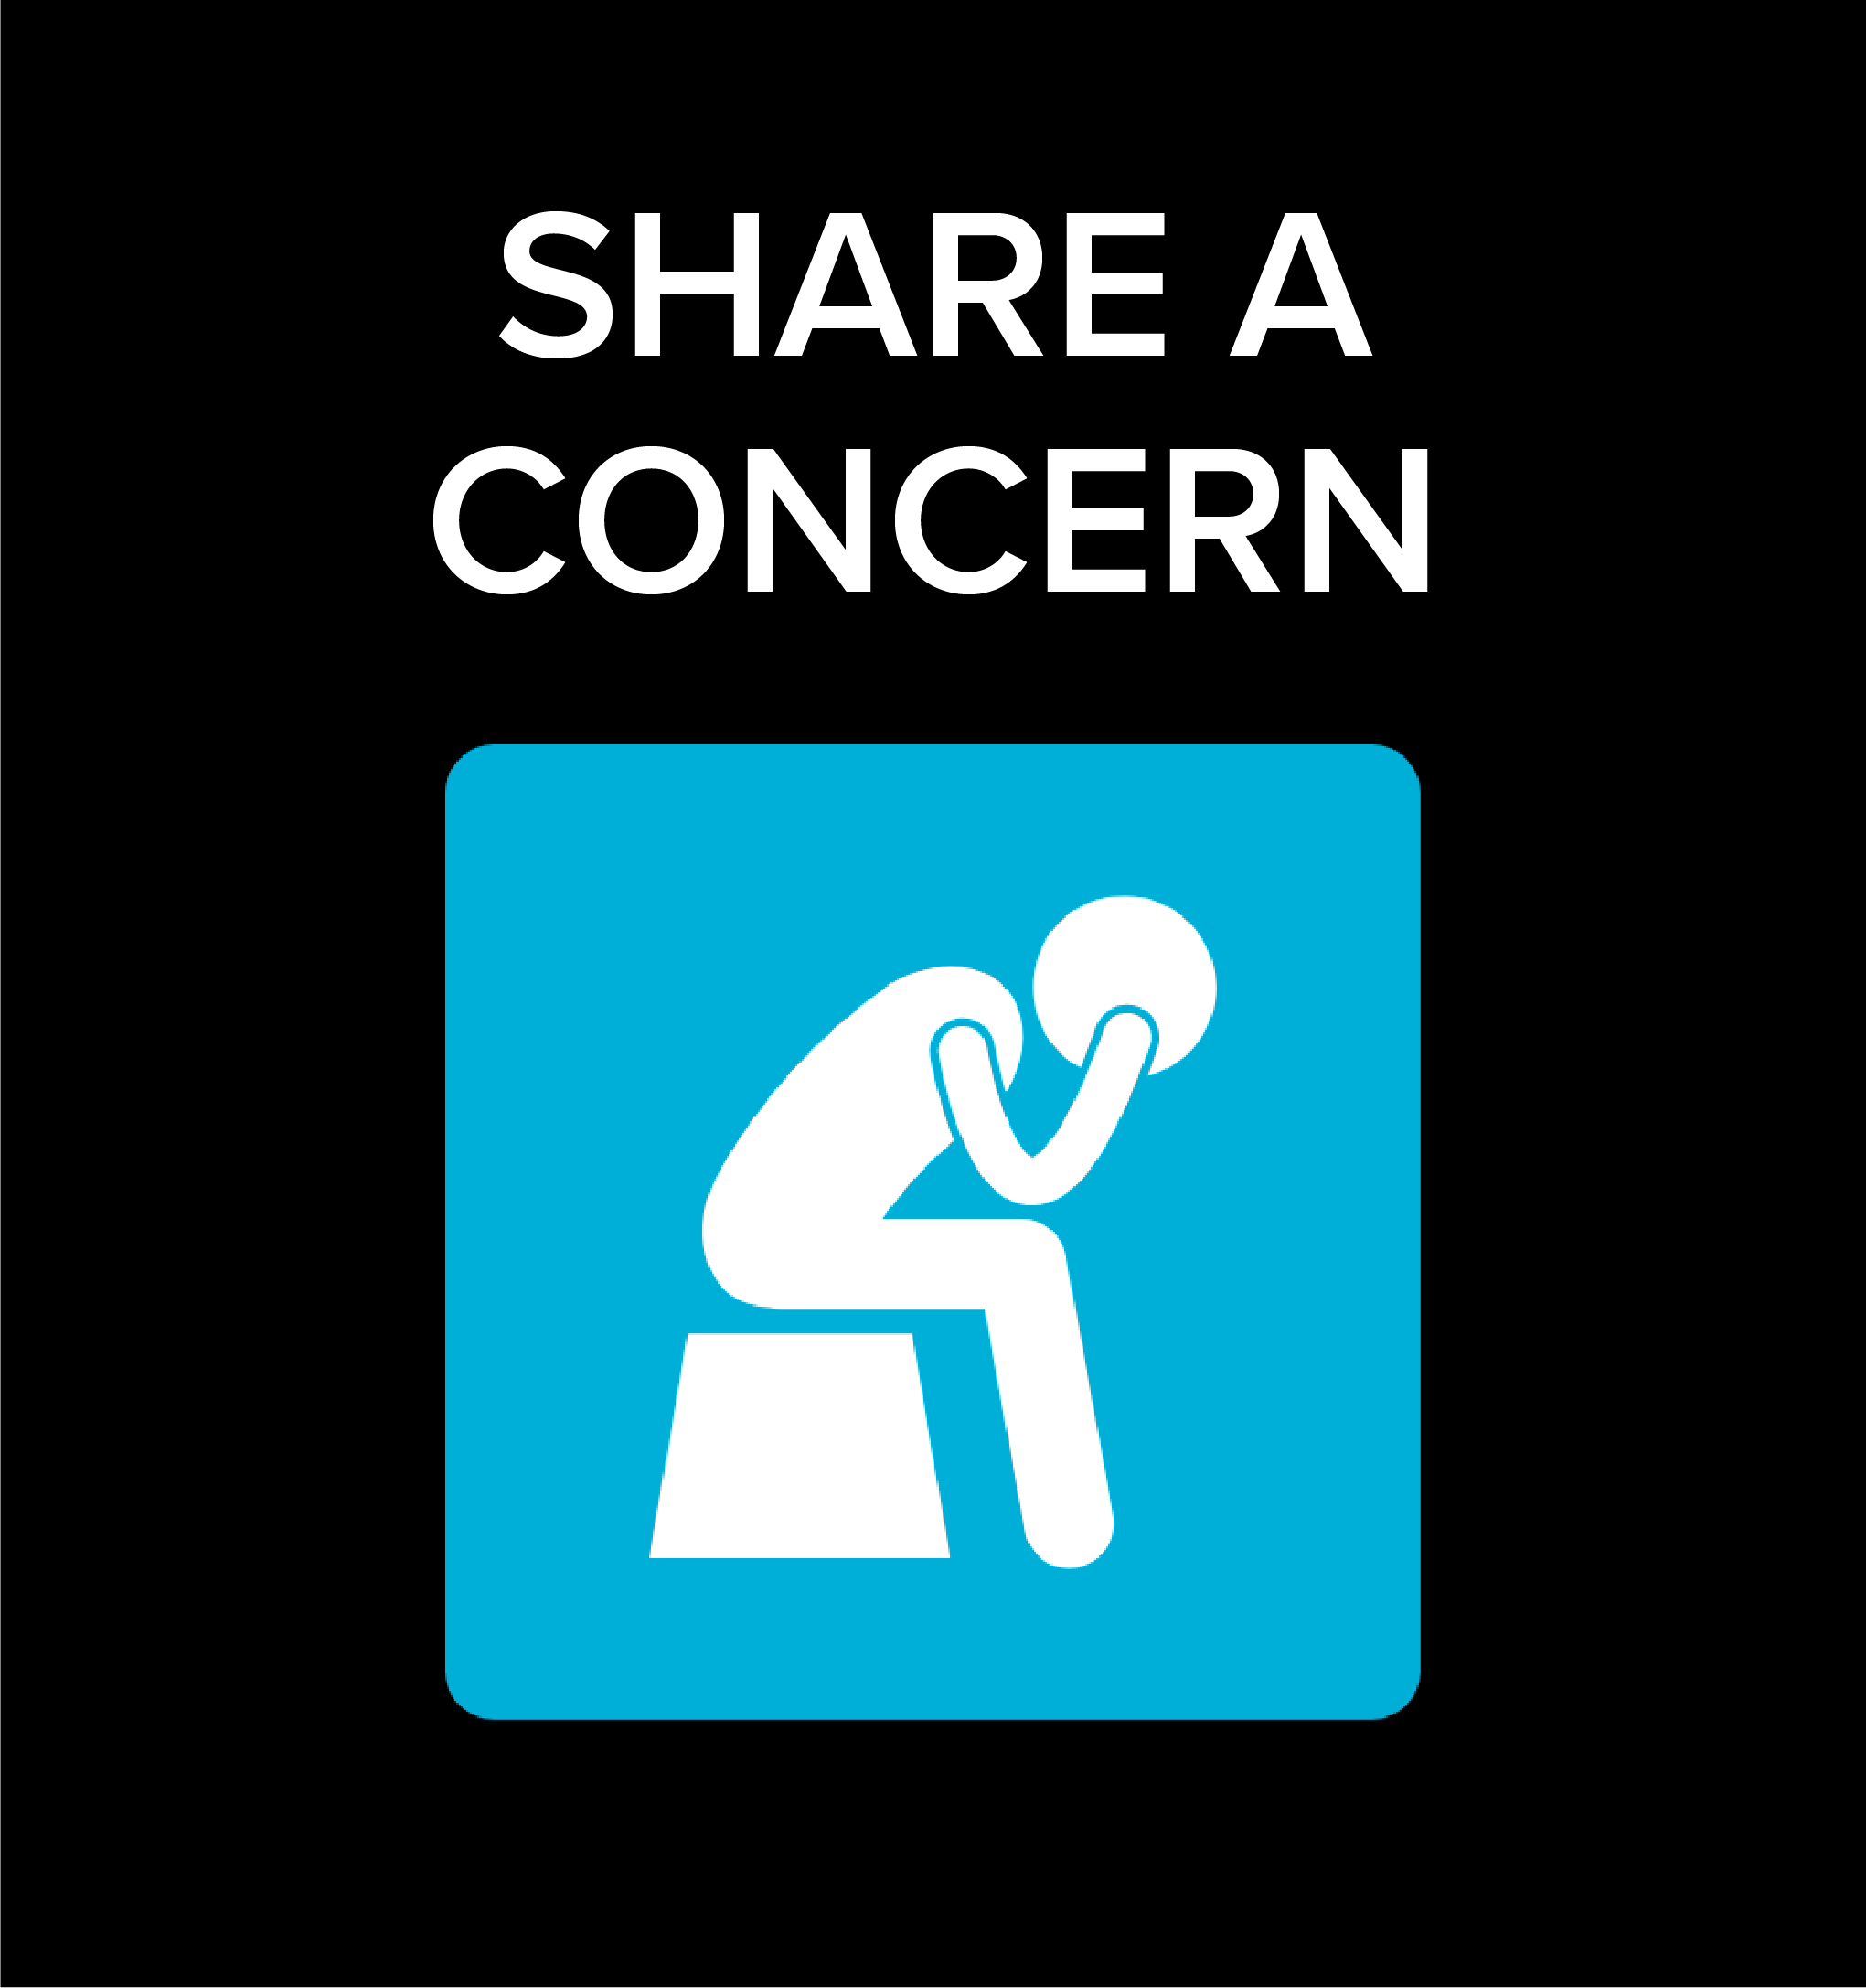 Share your concerns about the wellbeing of a student, faculty member, or staff person